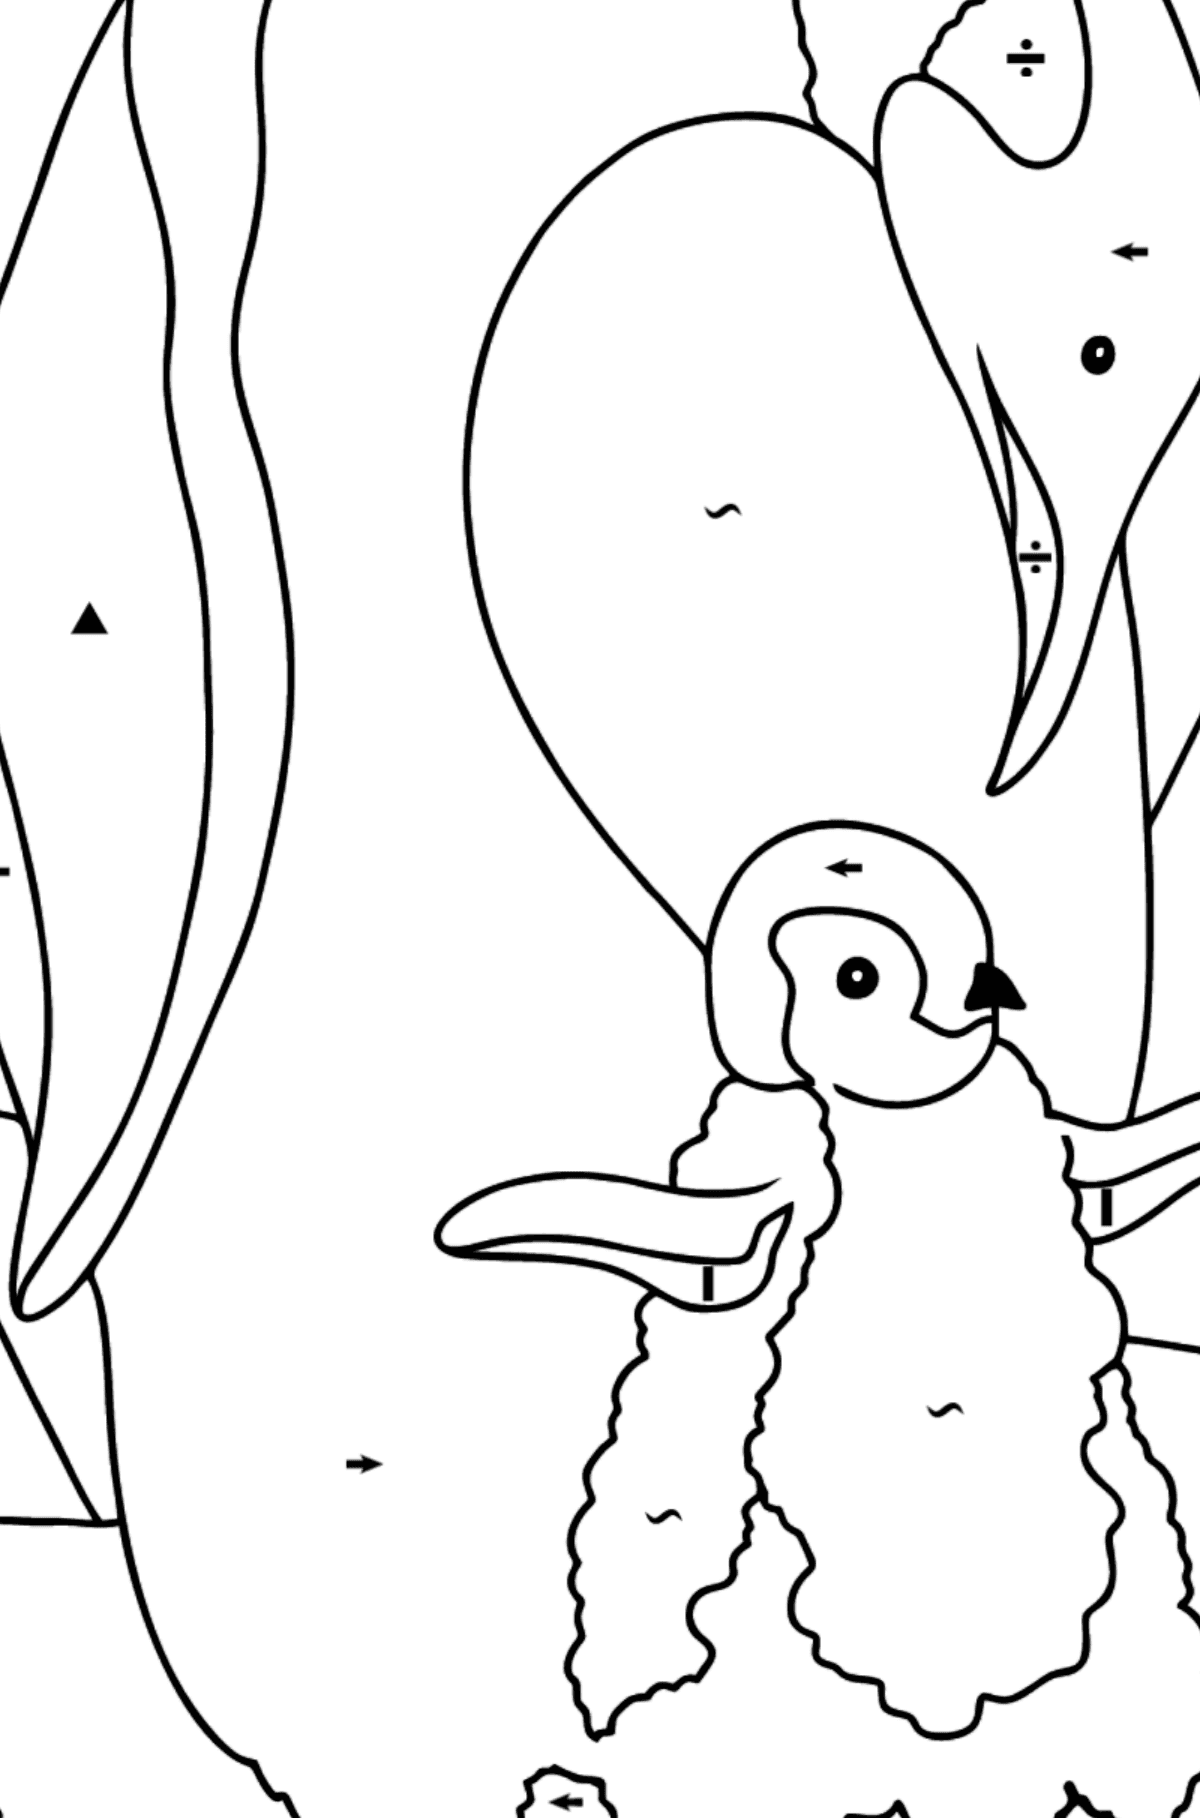 Coloring Page - A Penguin with a Baby - Coloring by Symbols for Kids